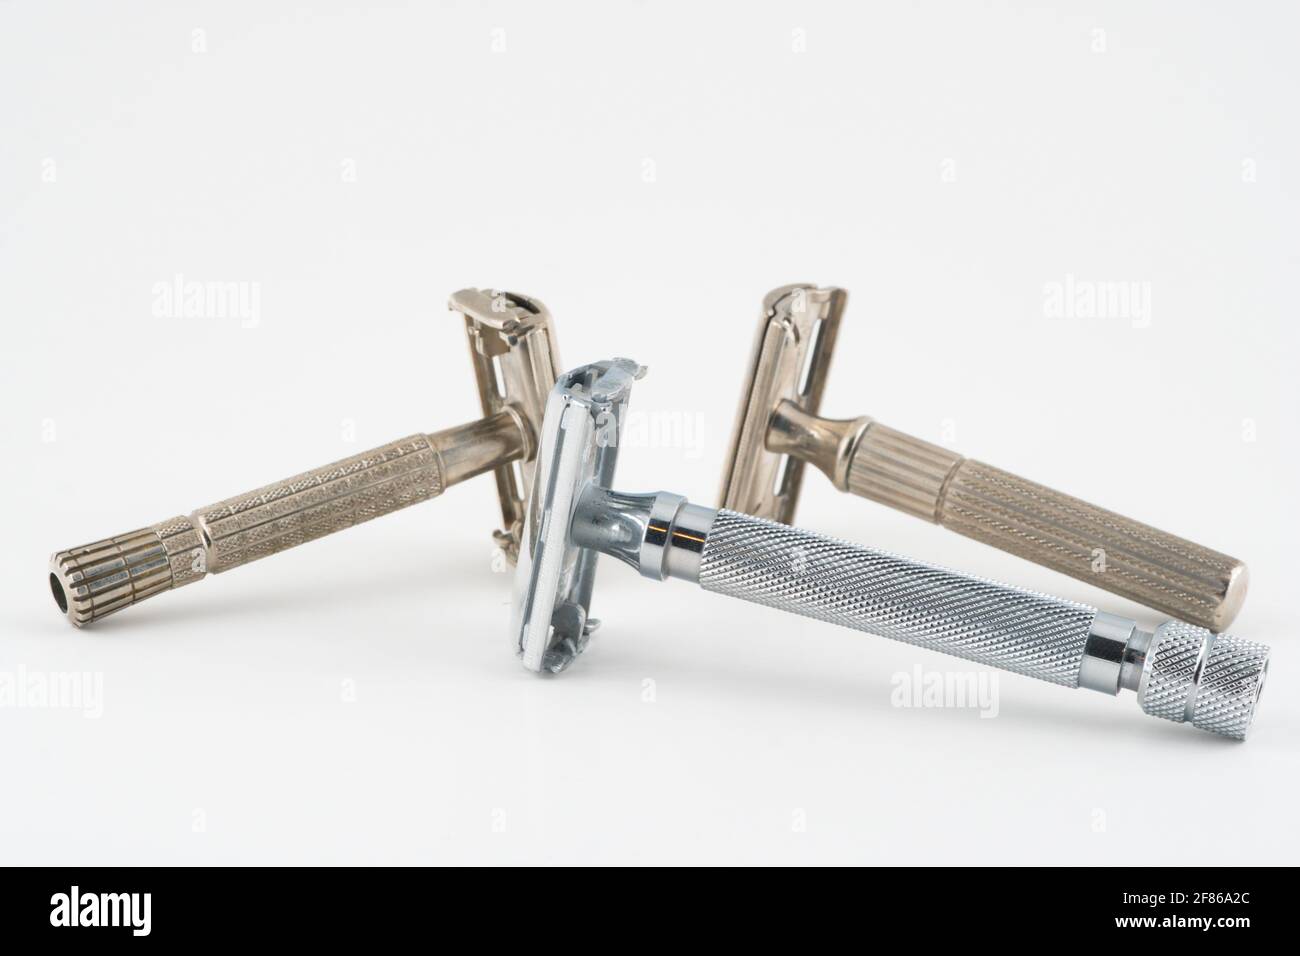 Vintage double edge safety razor for shaving, metal, nickle, and chrome. On white isolated background Stock Photo